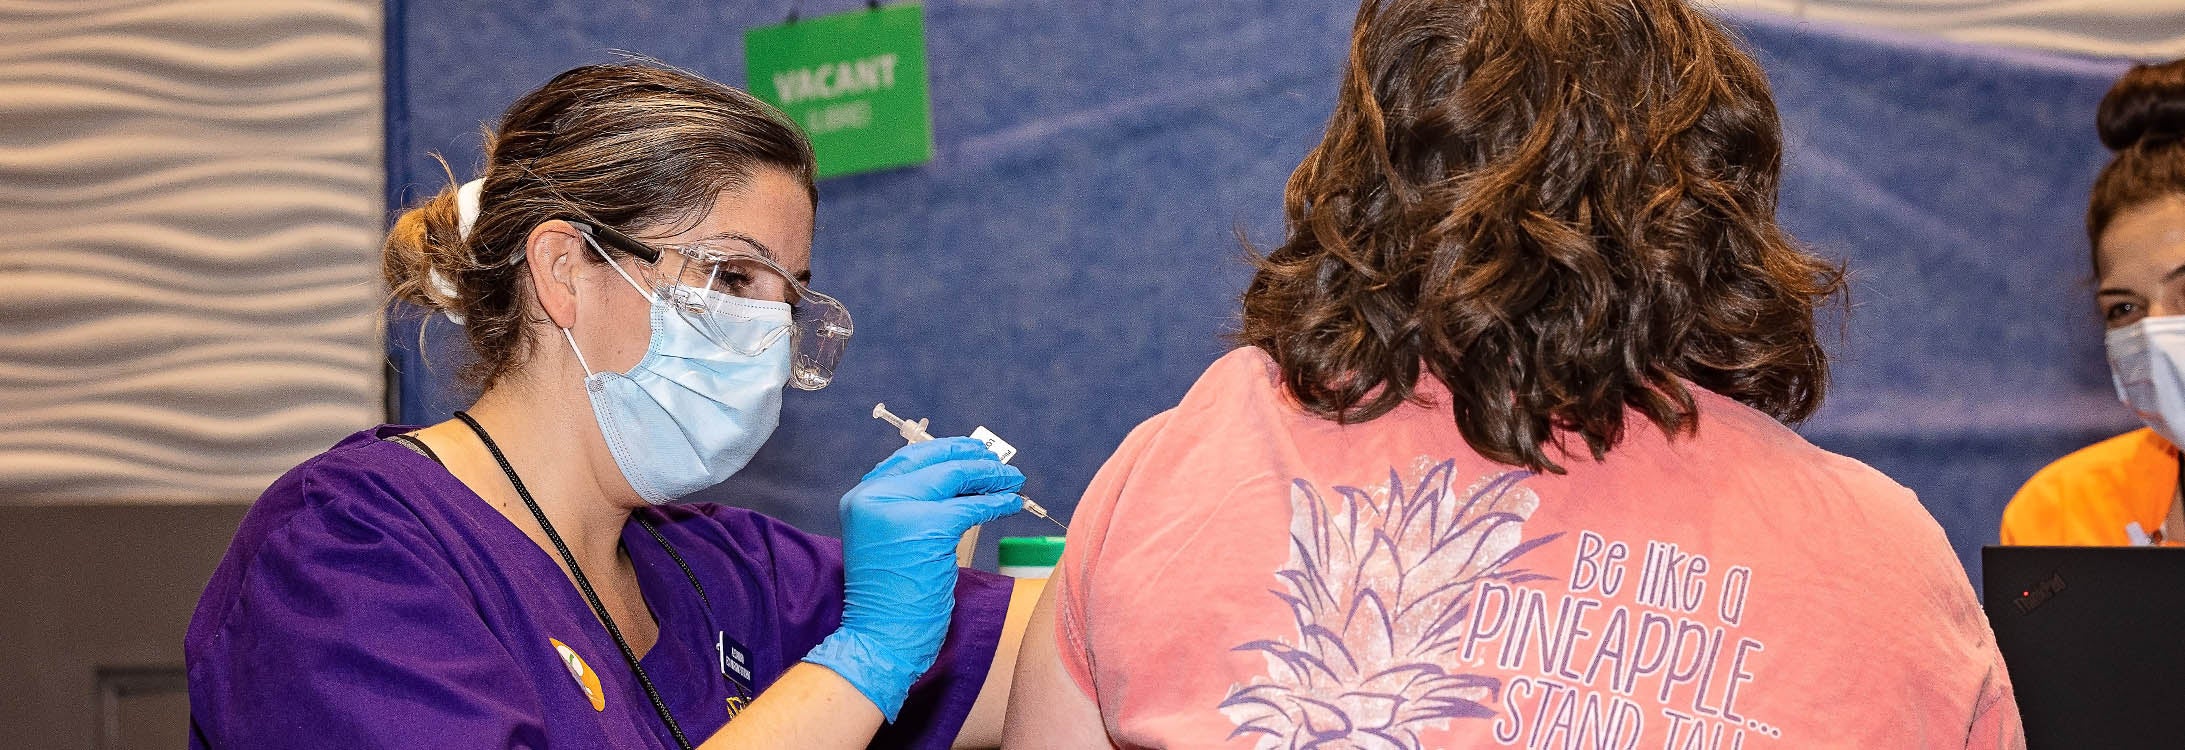 ECU Nursing student Alex Yllanes gives COVID-19 vaccines during a clinic event at the Greenville Convention Center on March 22, 2021.